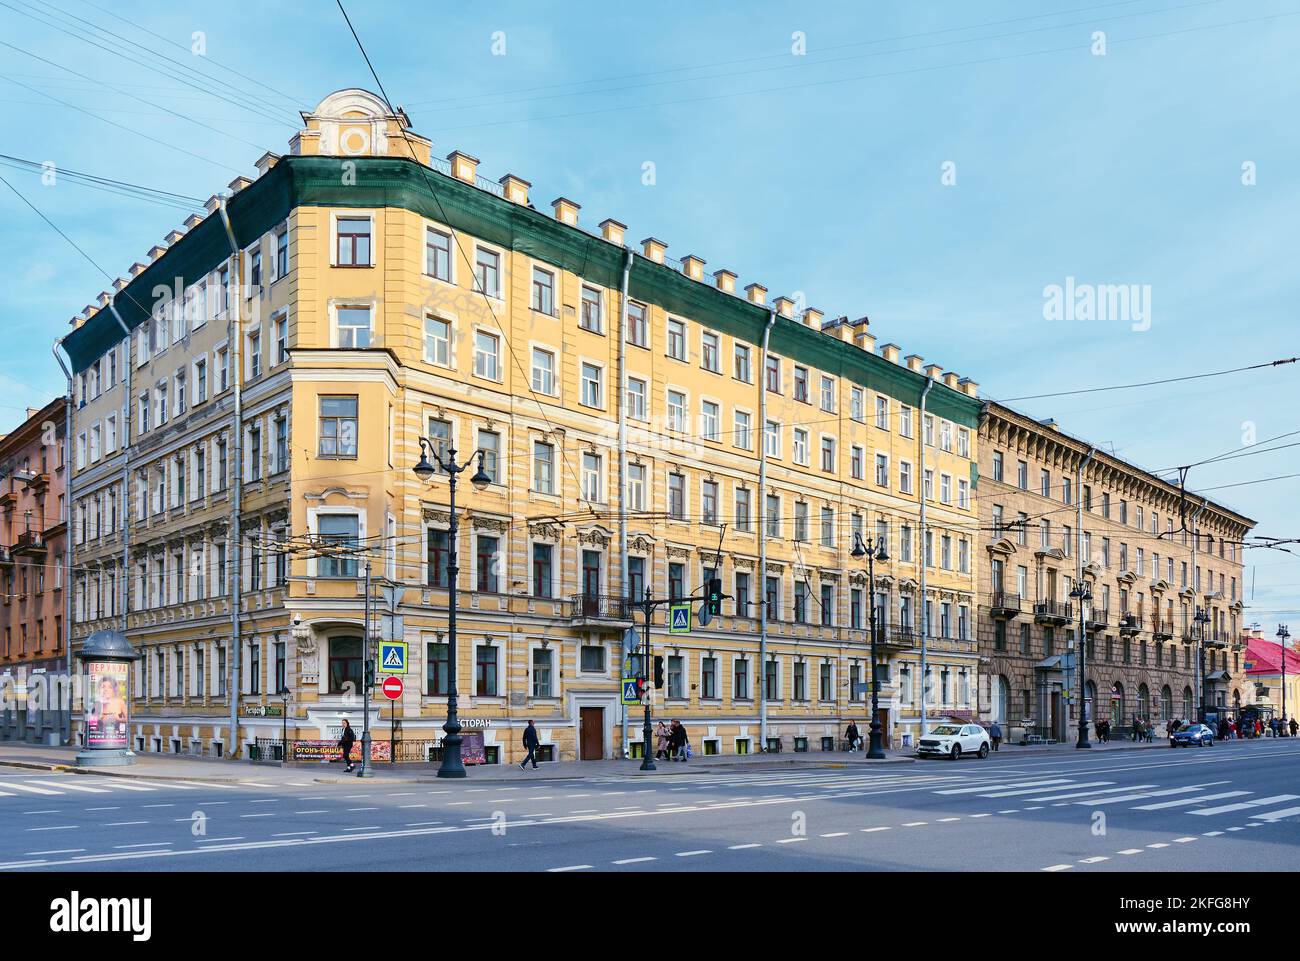 Nevsky Prospekt, the former profitable house of Alexander Nevsky Lavra, built in 1873 in the style of Eclecticism, landmark: St. Petersburg, Russia - Stock Photo